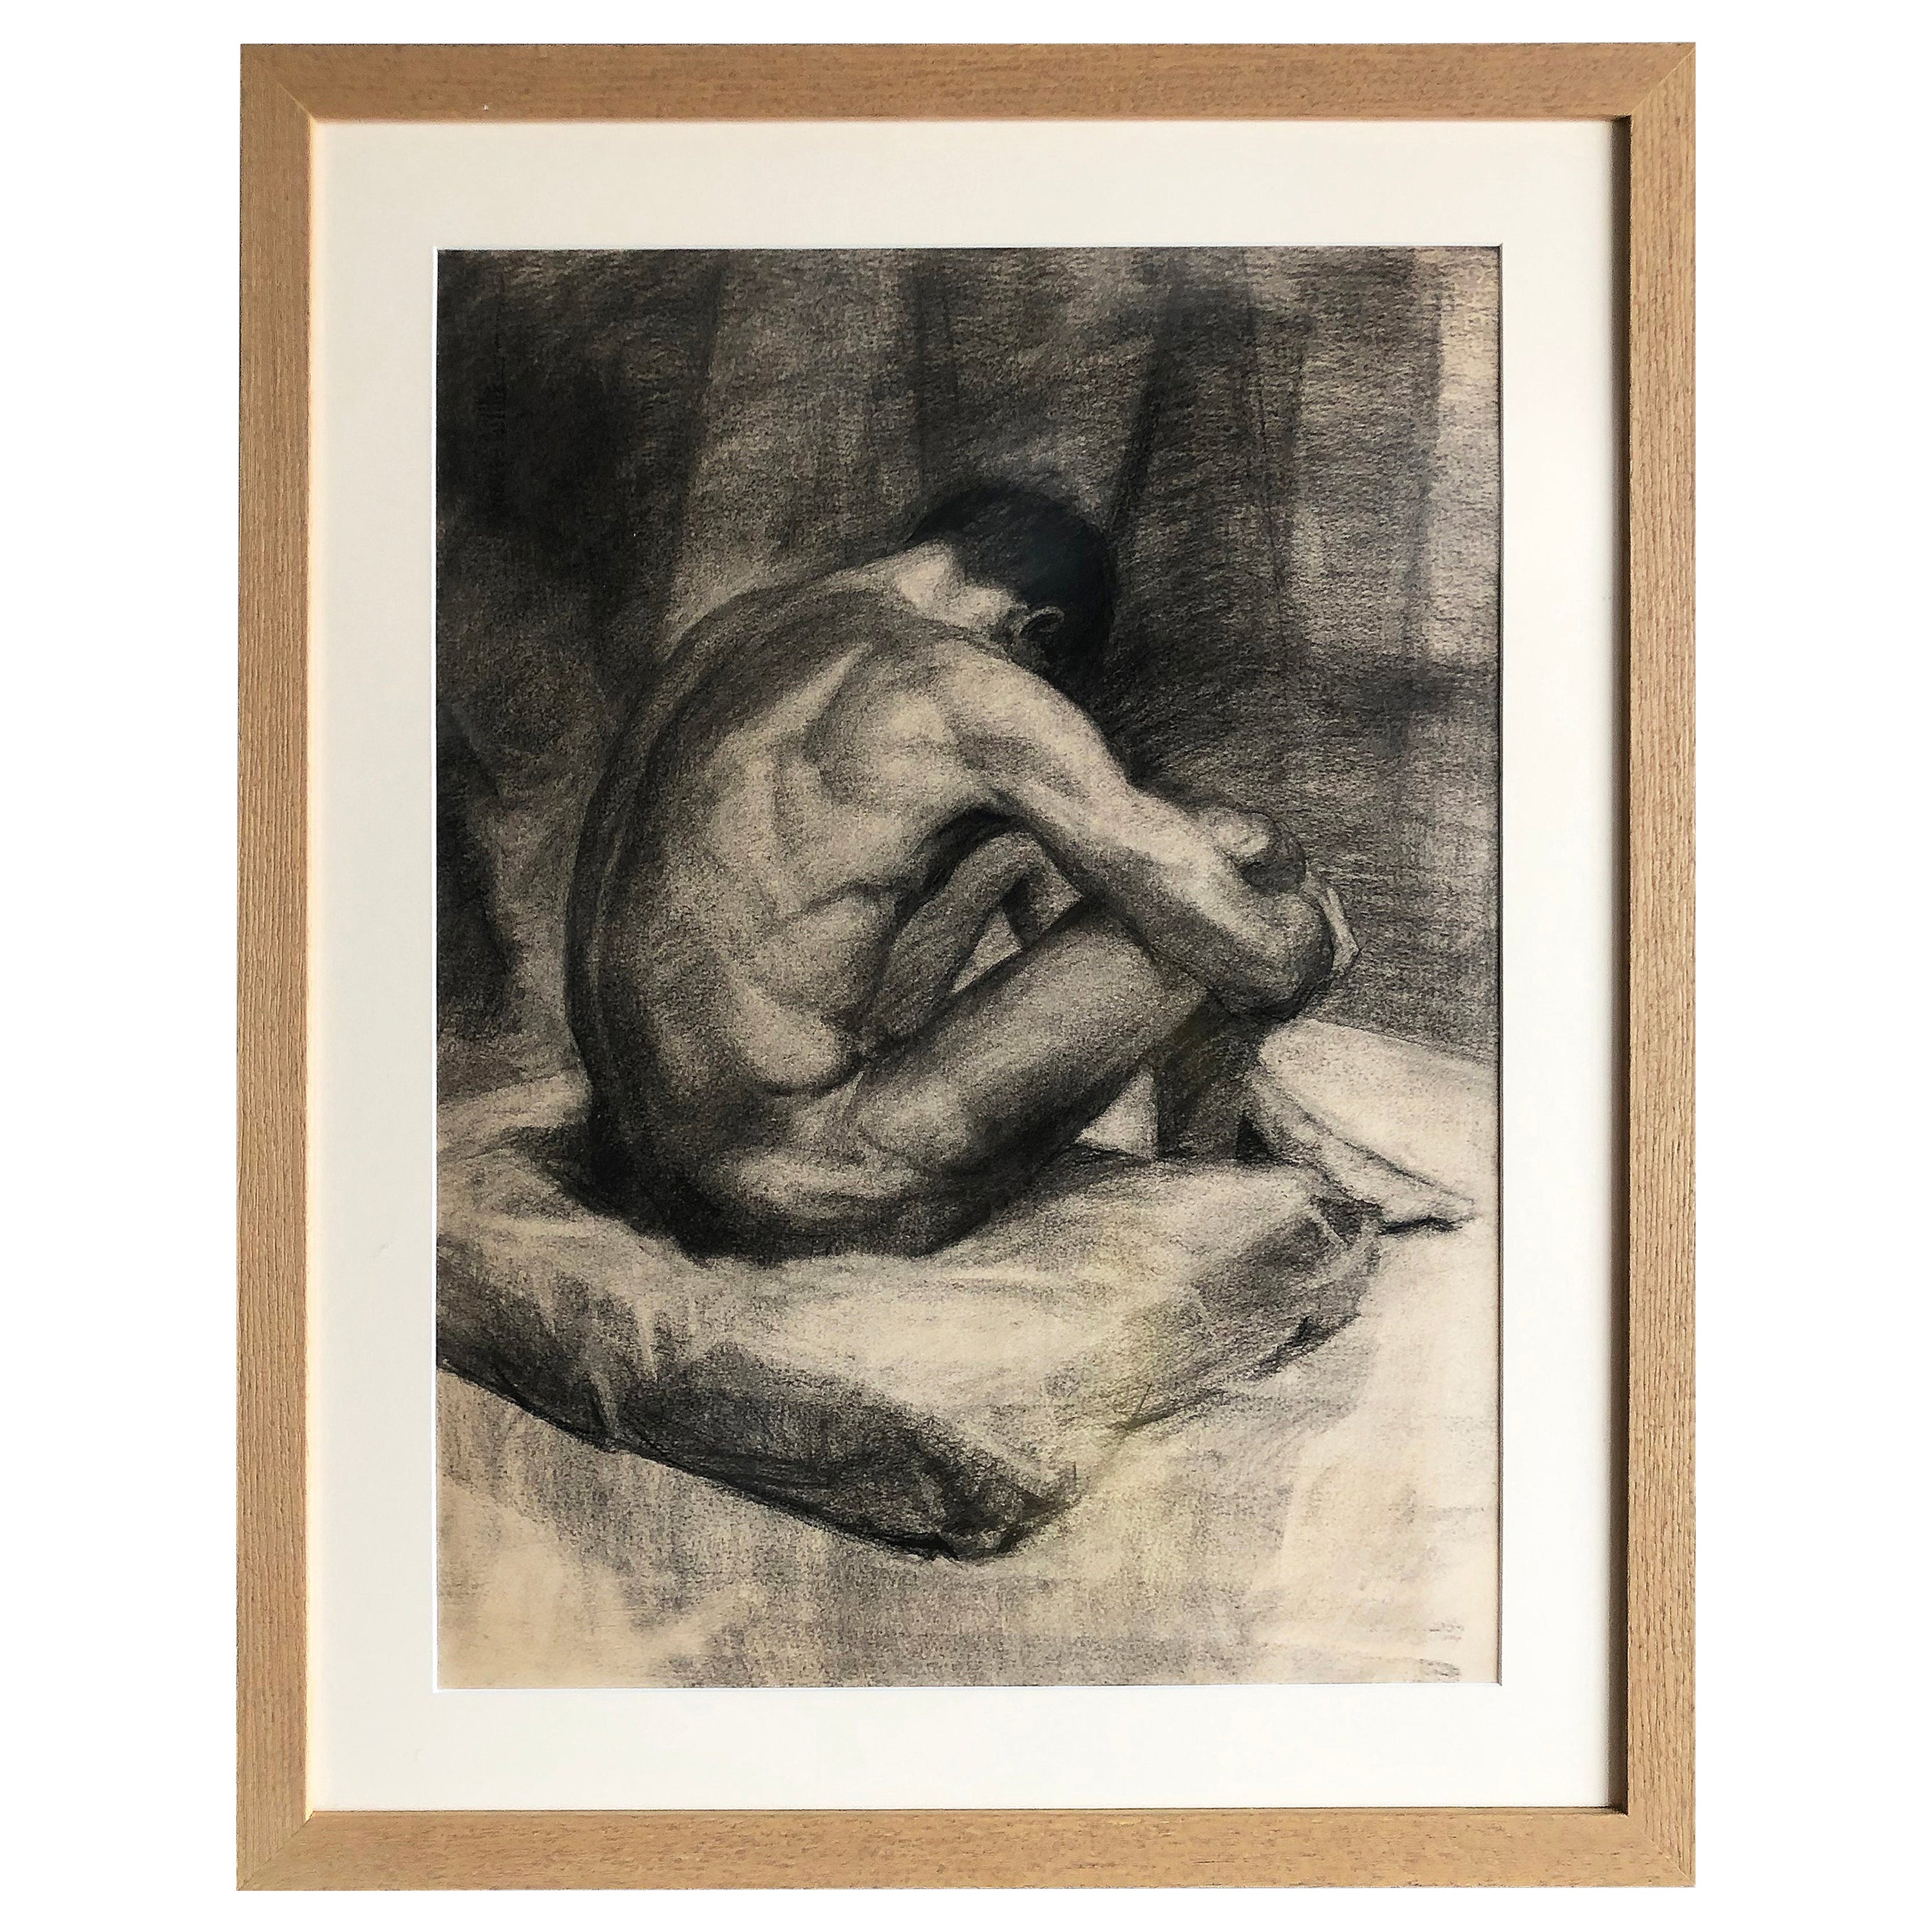 1940s Male Nude Art Study Drawing in Charcoal on Paper